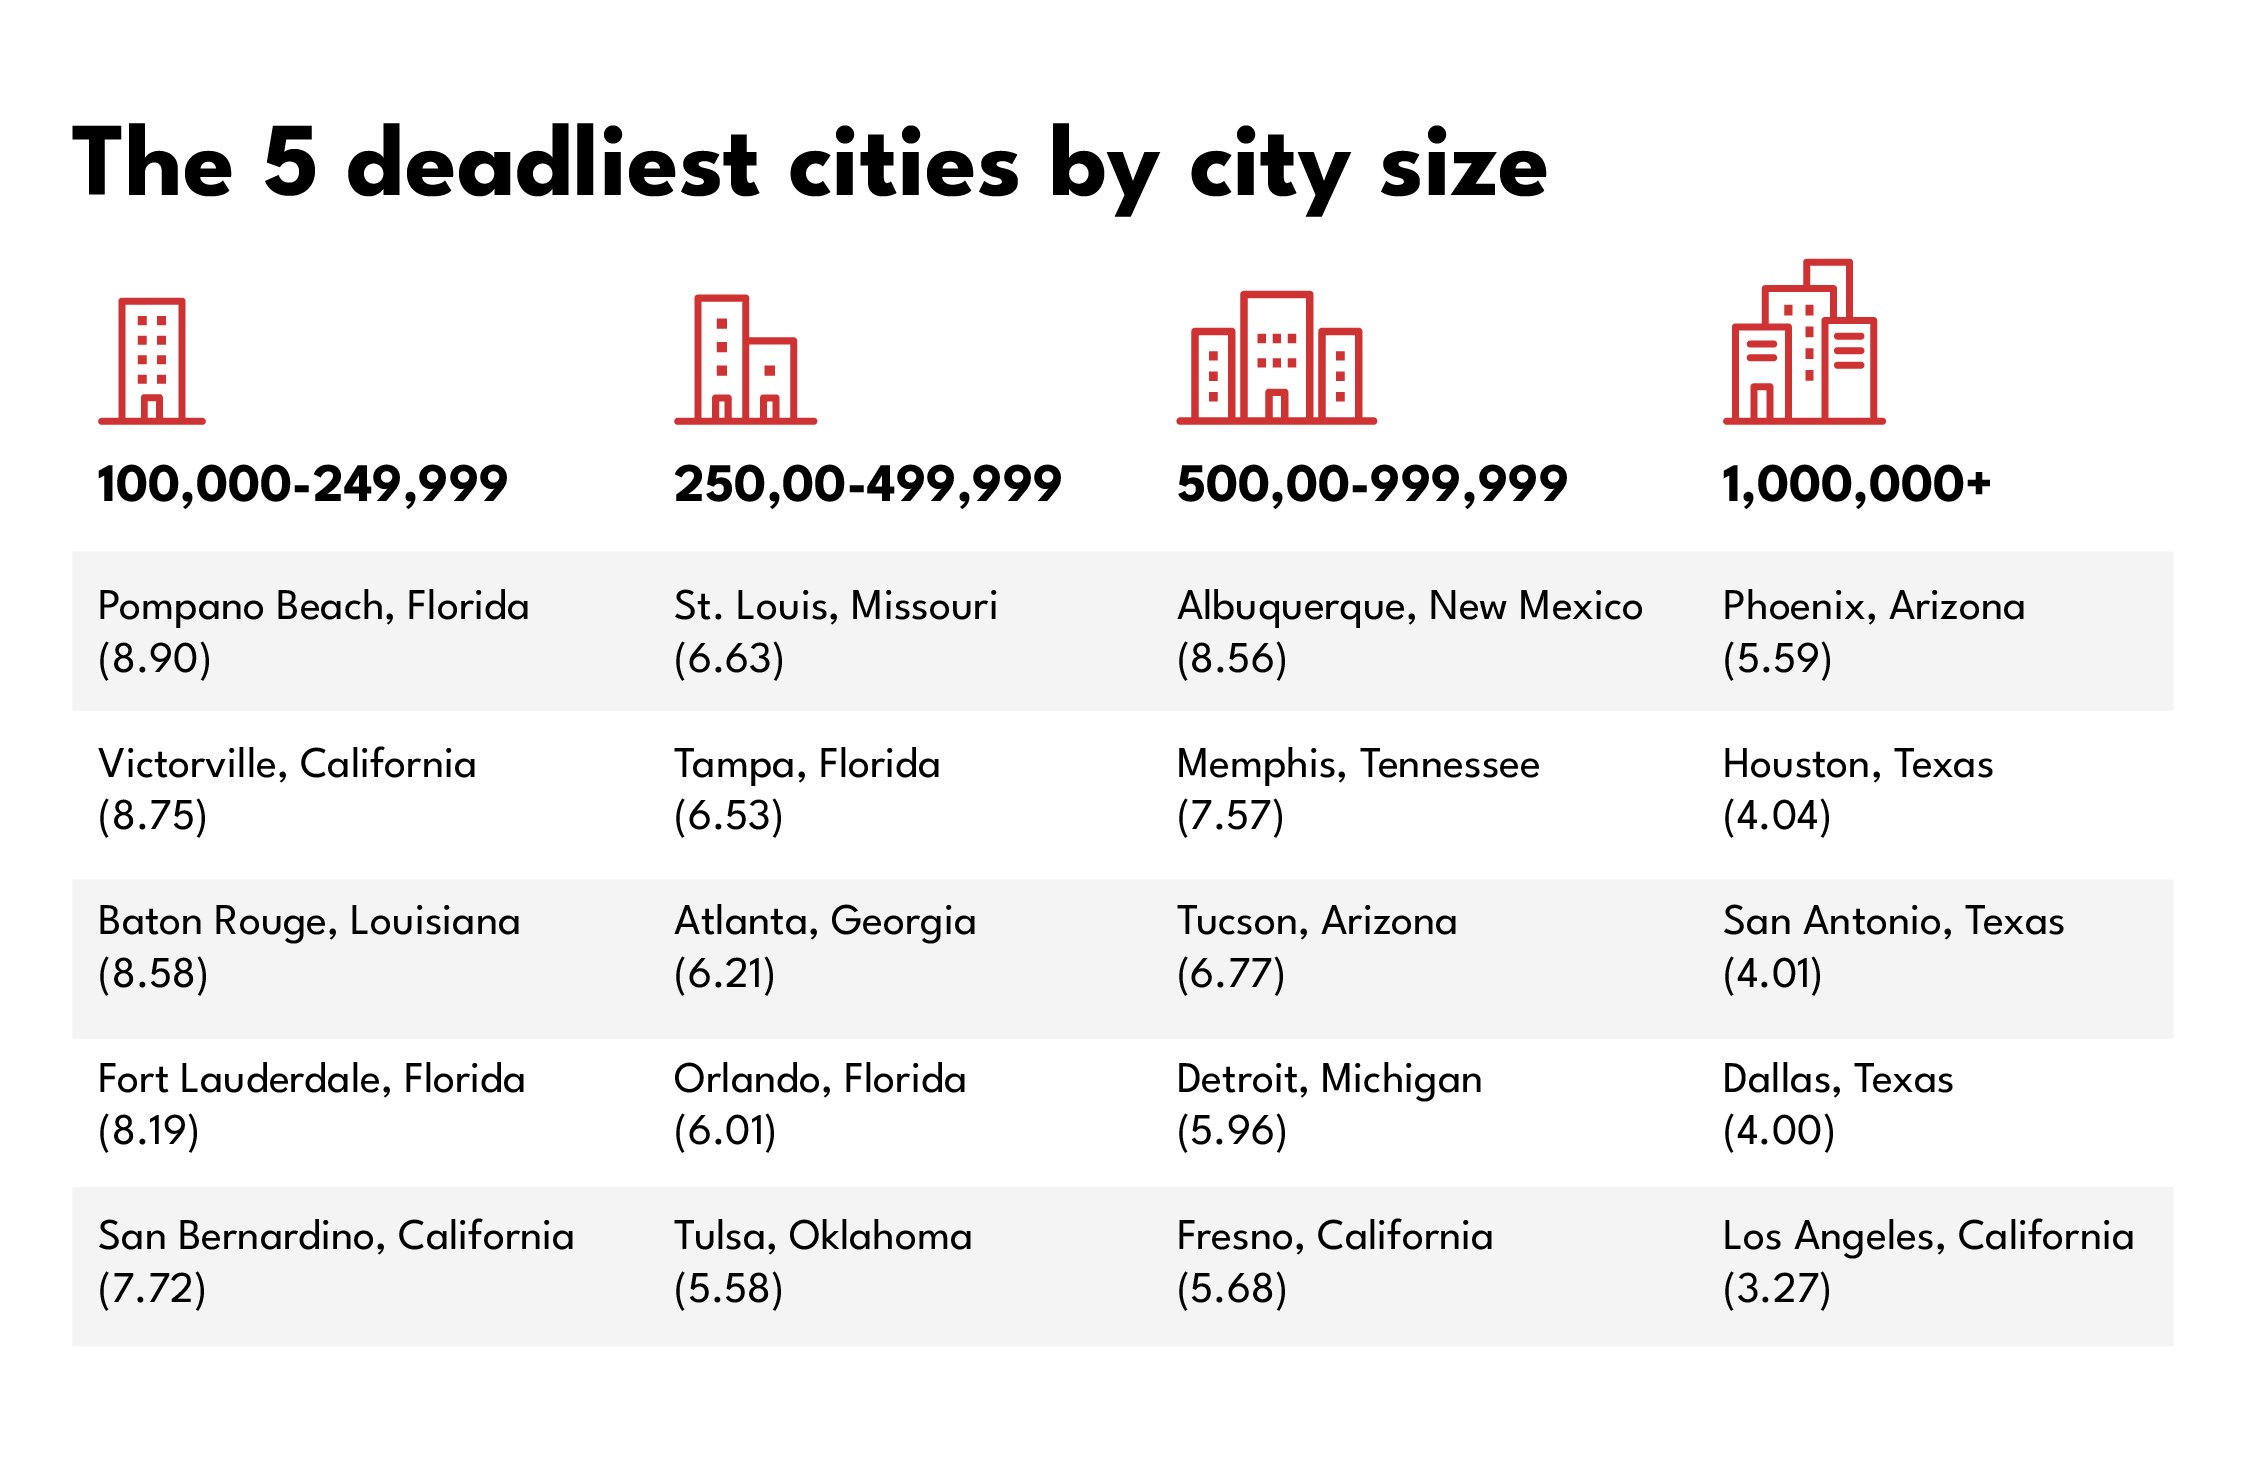 A chart showing the 5 deadliest cities by city size